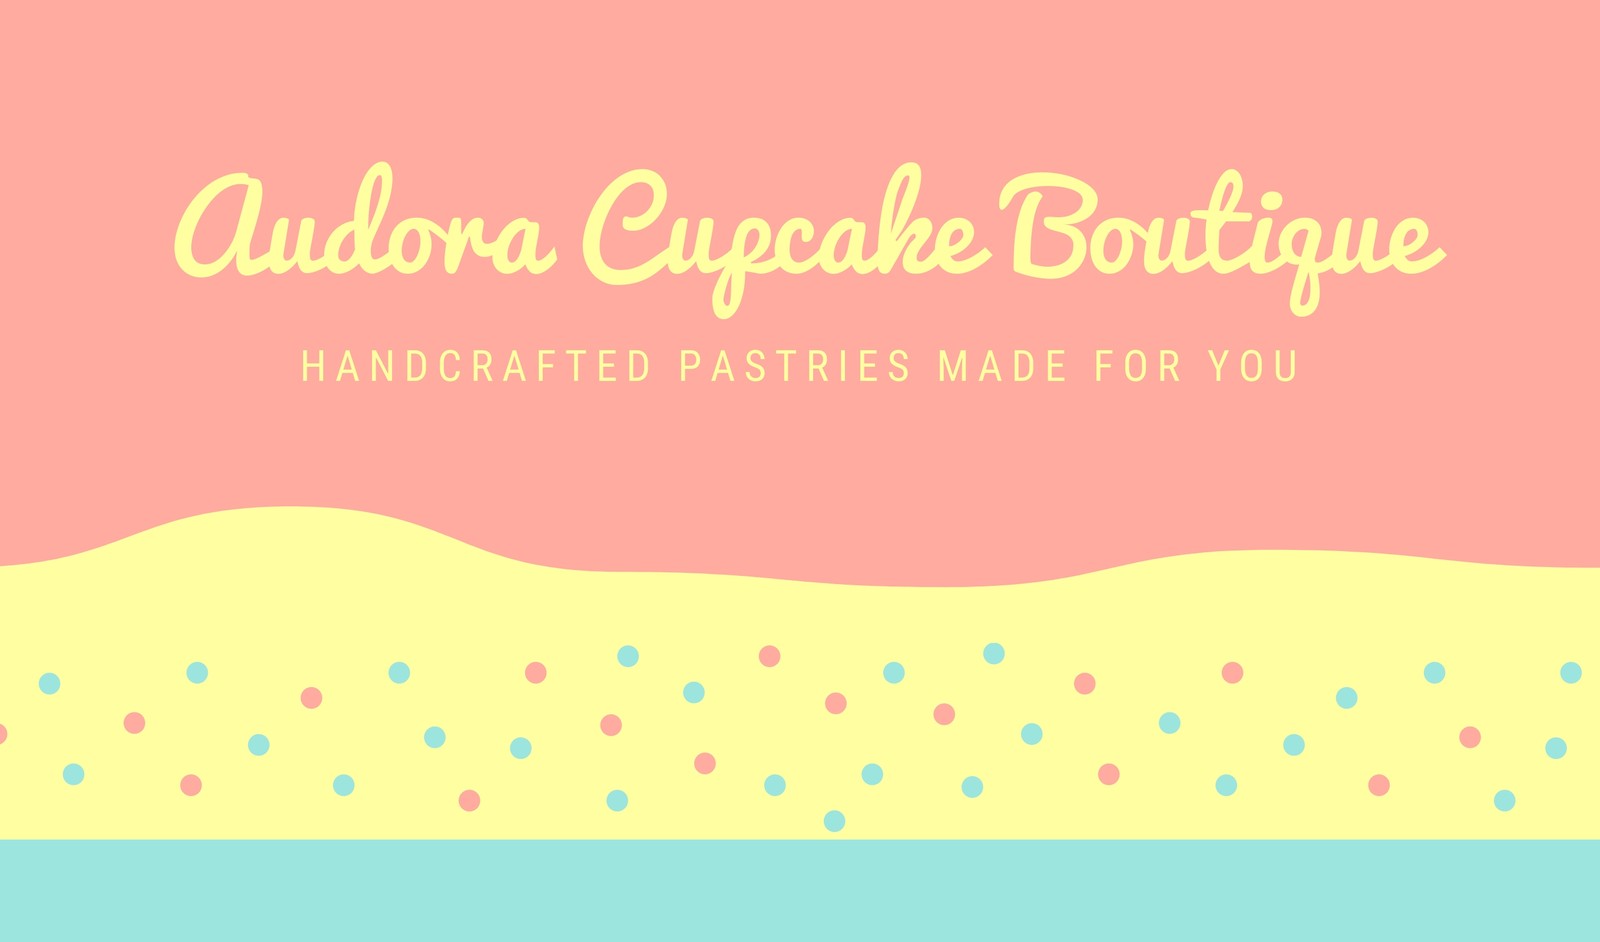 Free printable, customizable cake business card templates  Canva With Regard To Cake Business Cards Templates Free